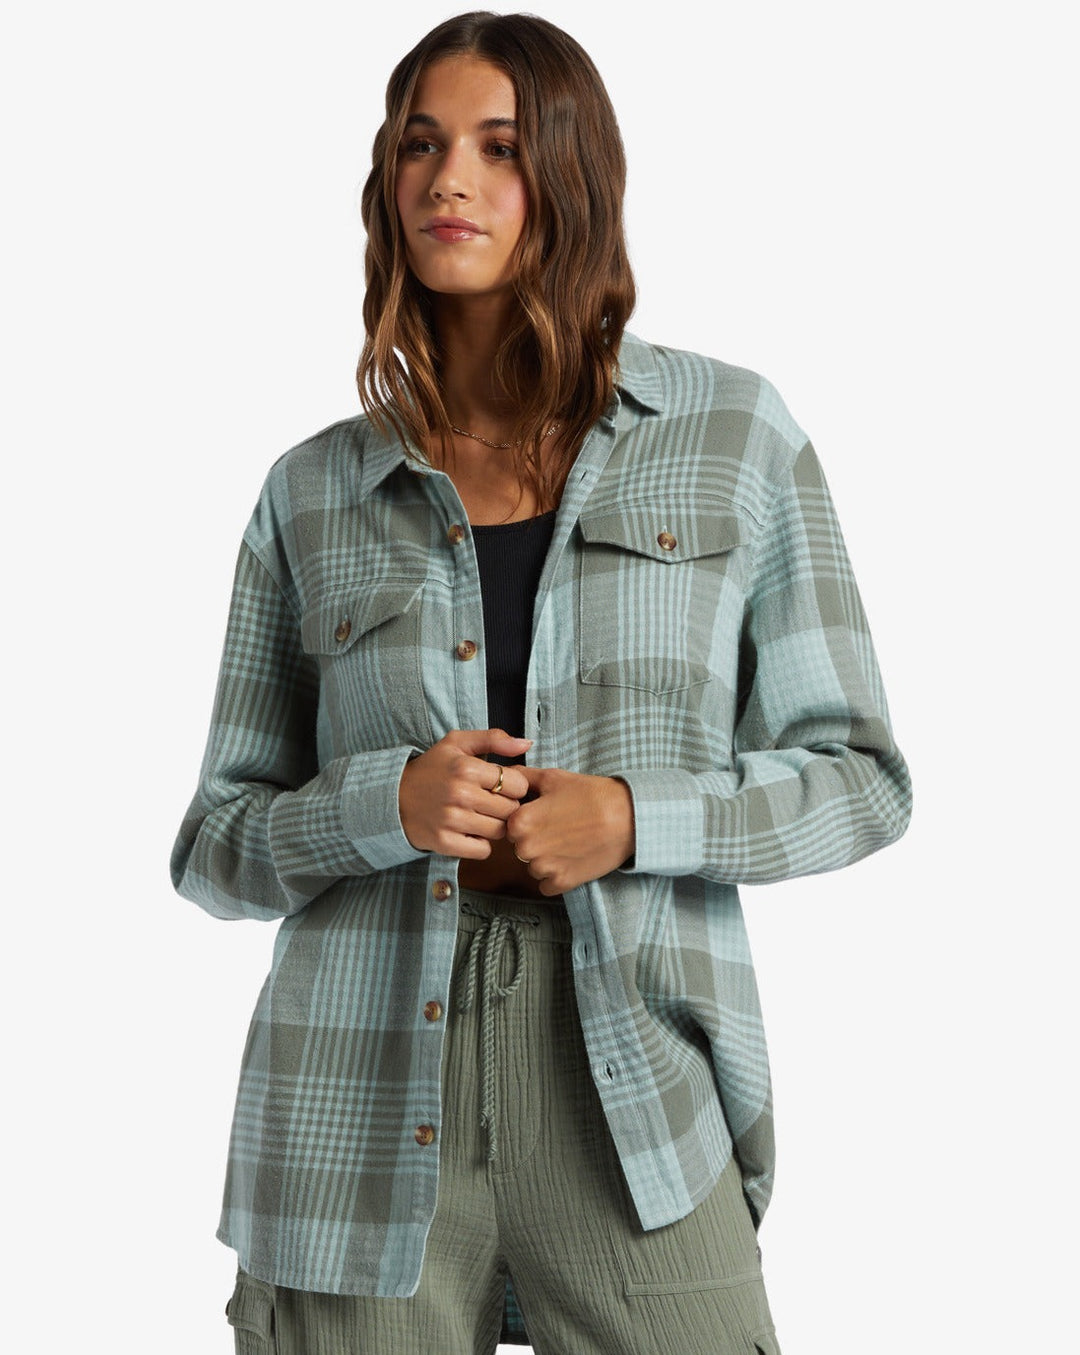 Let It Go Flannel Long Sleeve Shirt - Anthracite Hallo Plaid